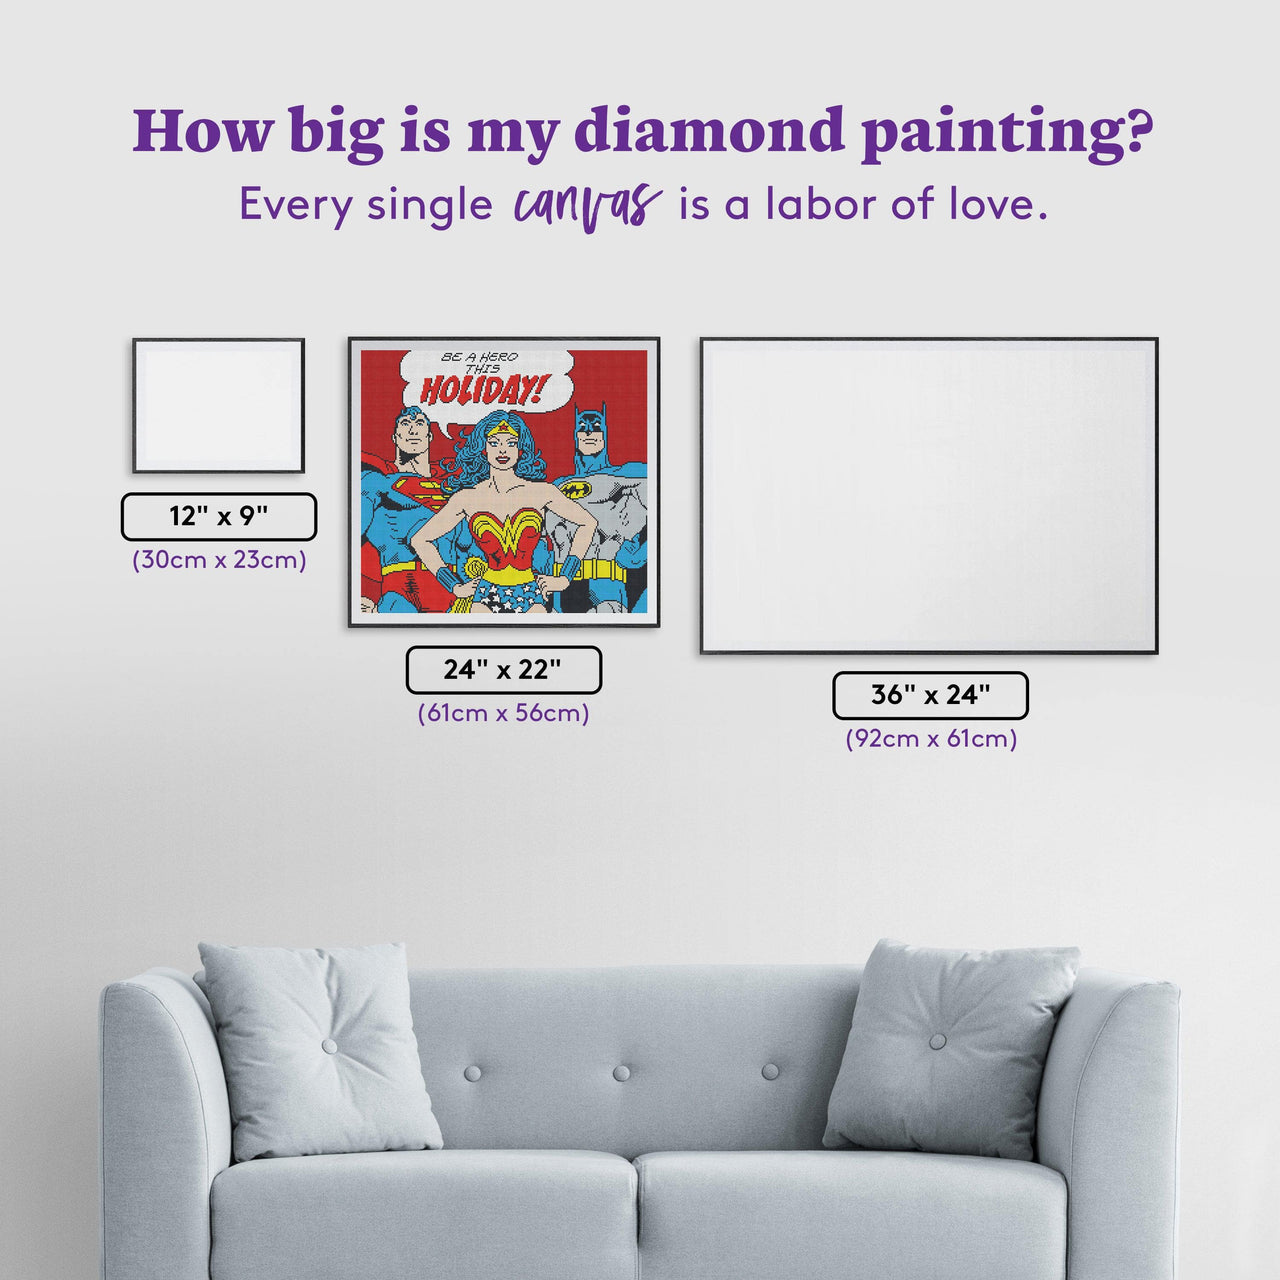 Diamond Painting Holiday Hero 24" x 22" (61cm x 56cm) / Round With 8 Colors Including 2 ABs / 43,183